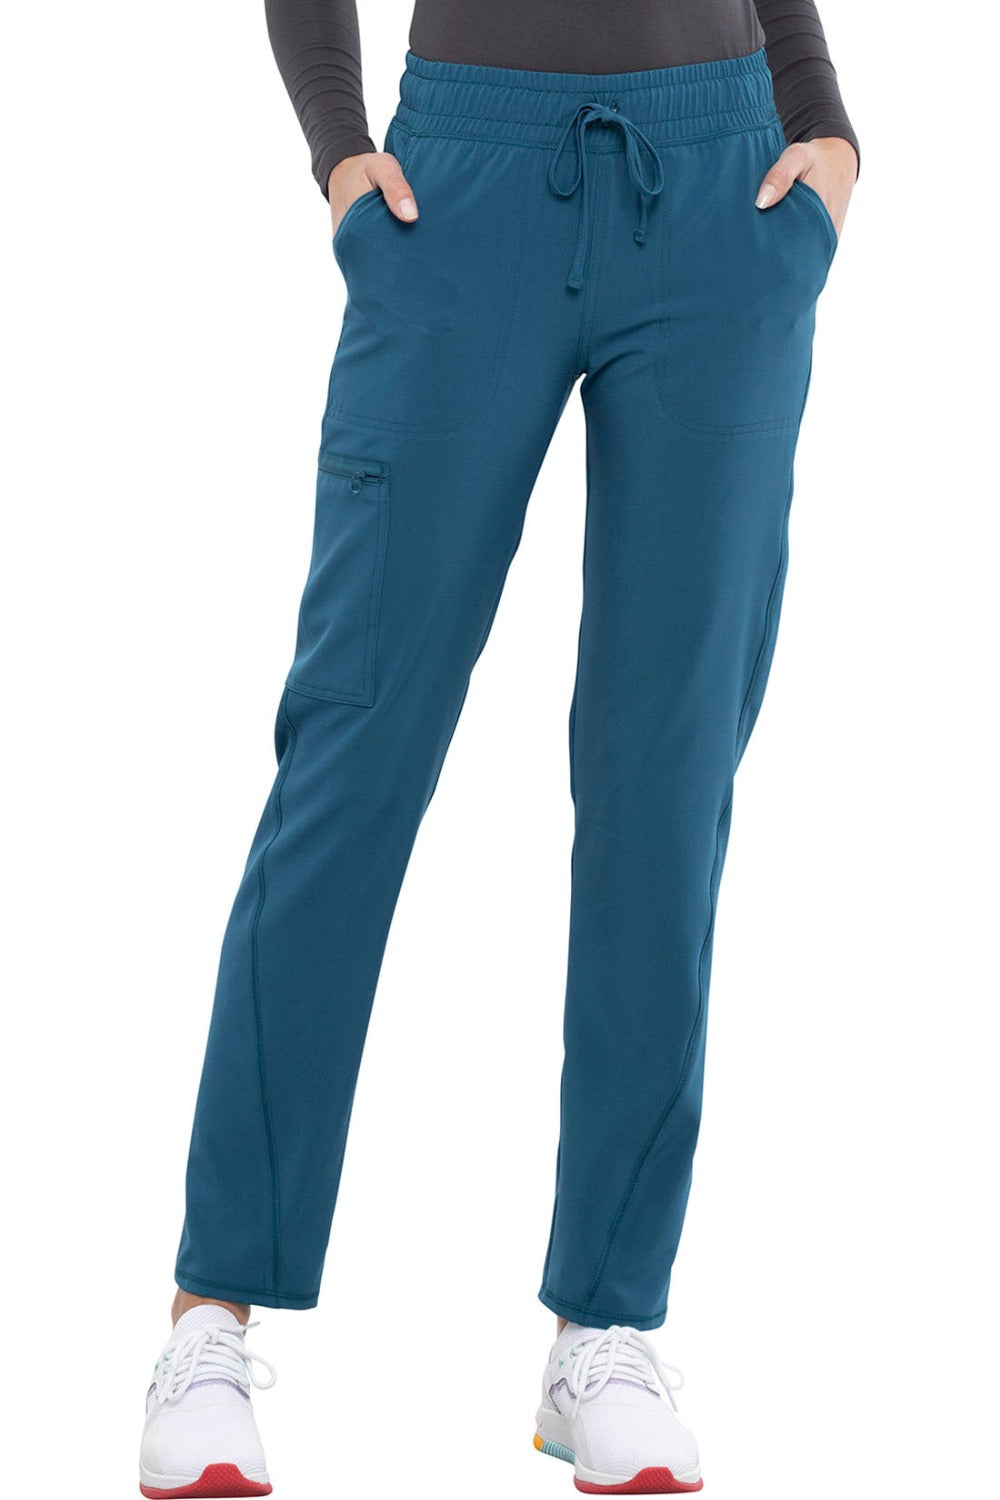 Cherokee Allura Petite Scrub Pant Mid Rise Tapered Leg Drawstring in Caribbean at Parker's Clothing and Shoes.